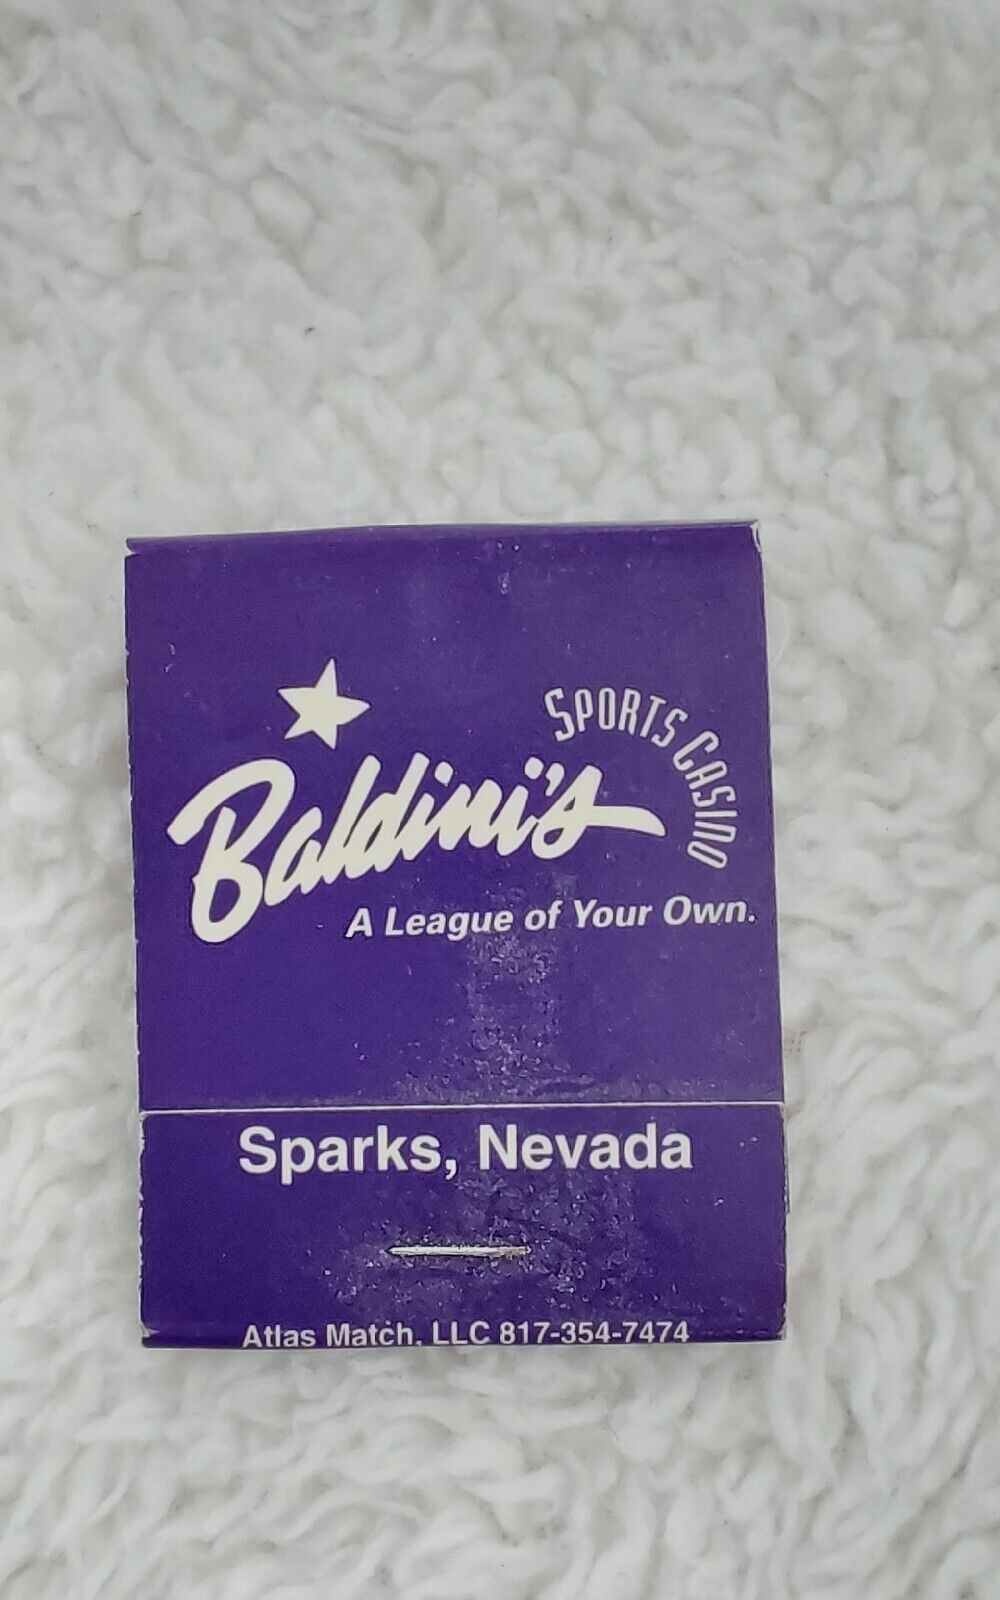 Baldini\'s Sports Casino Matchbook Sparks Nevada Matches Collectibles 